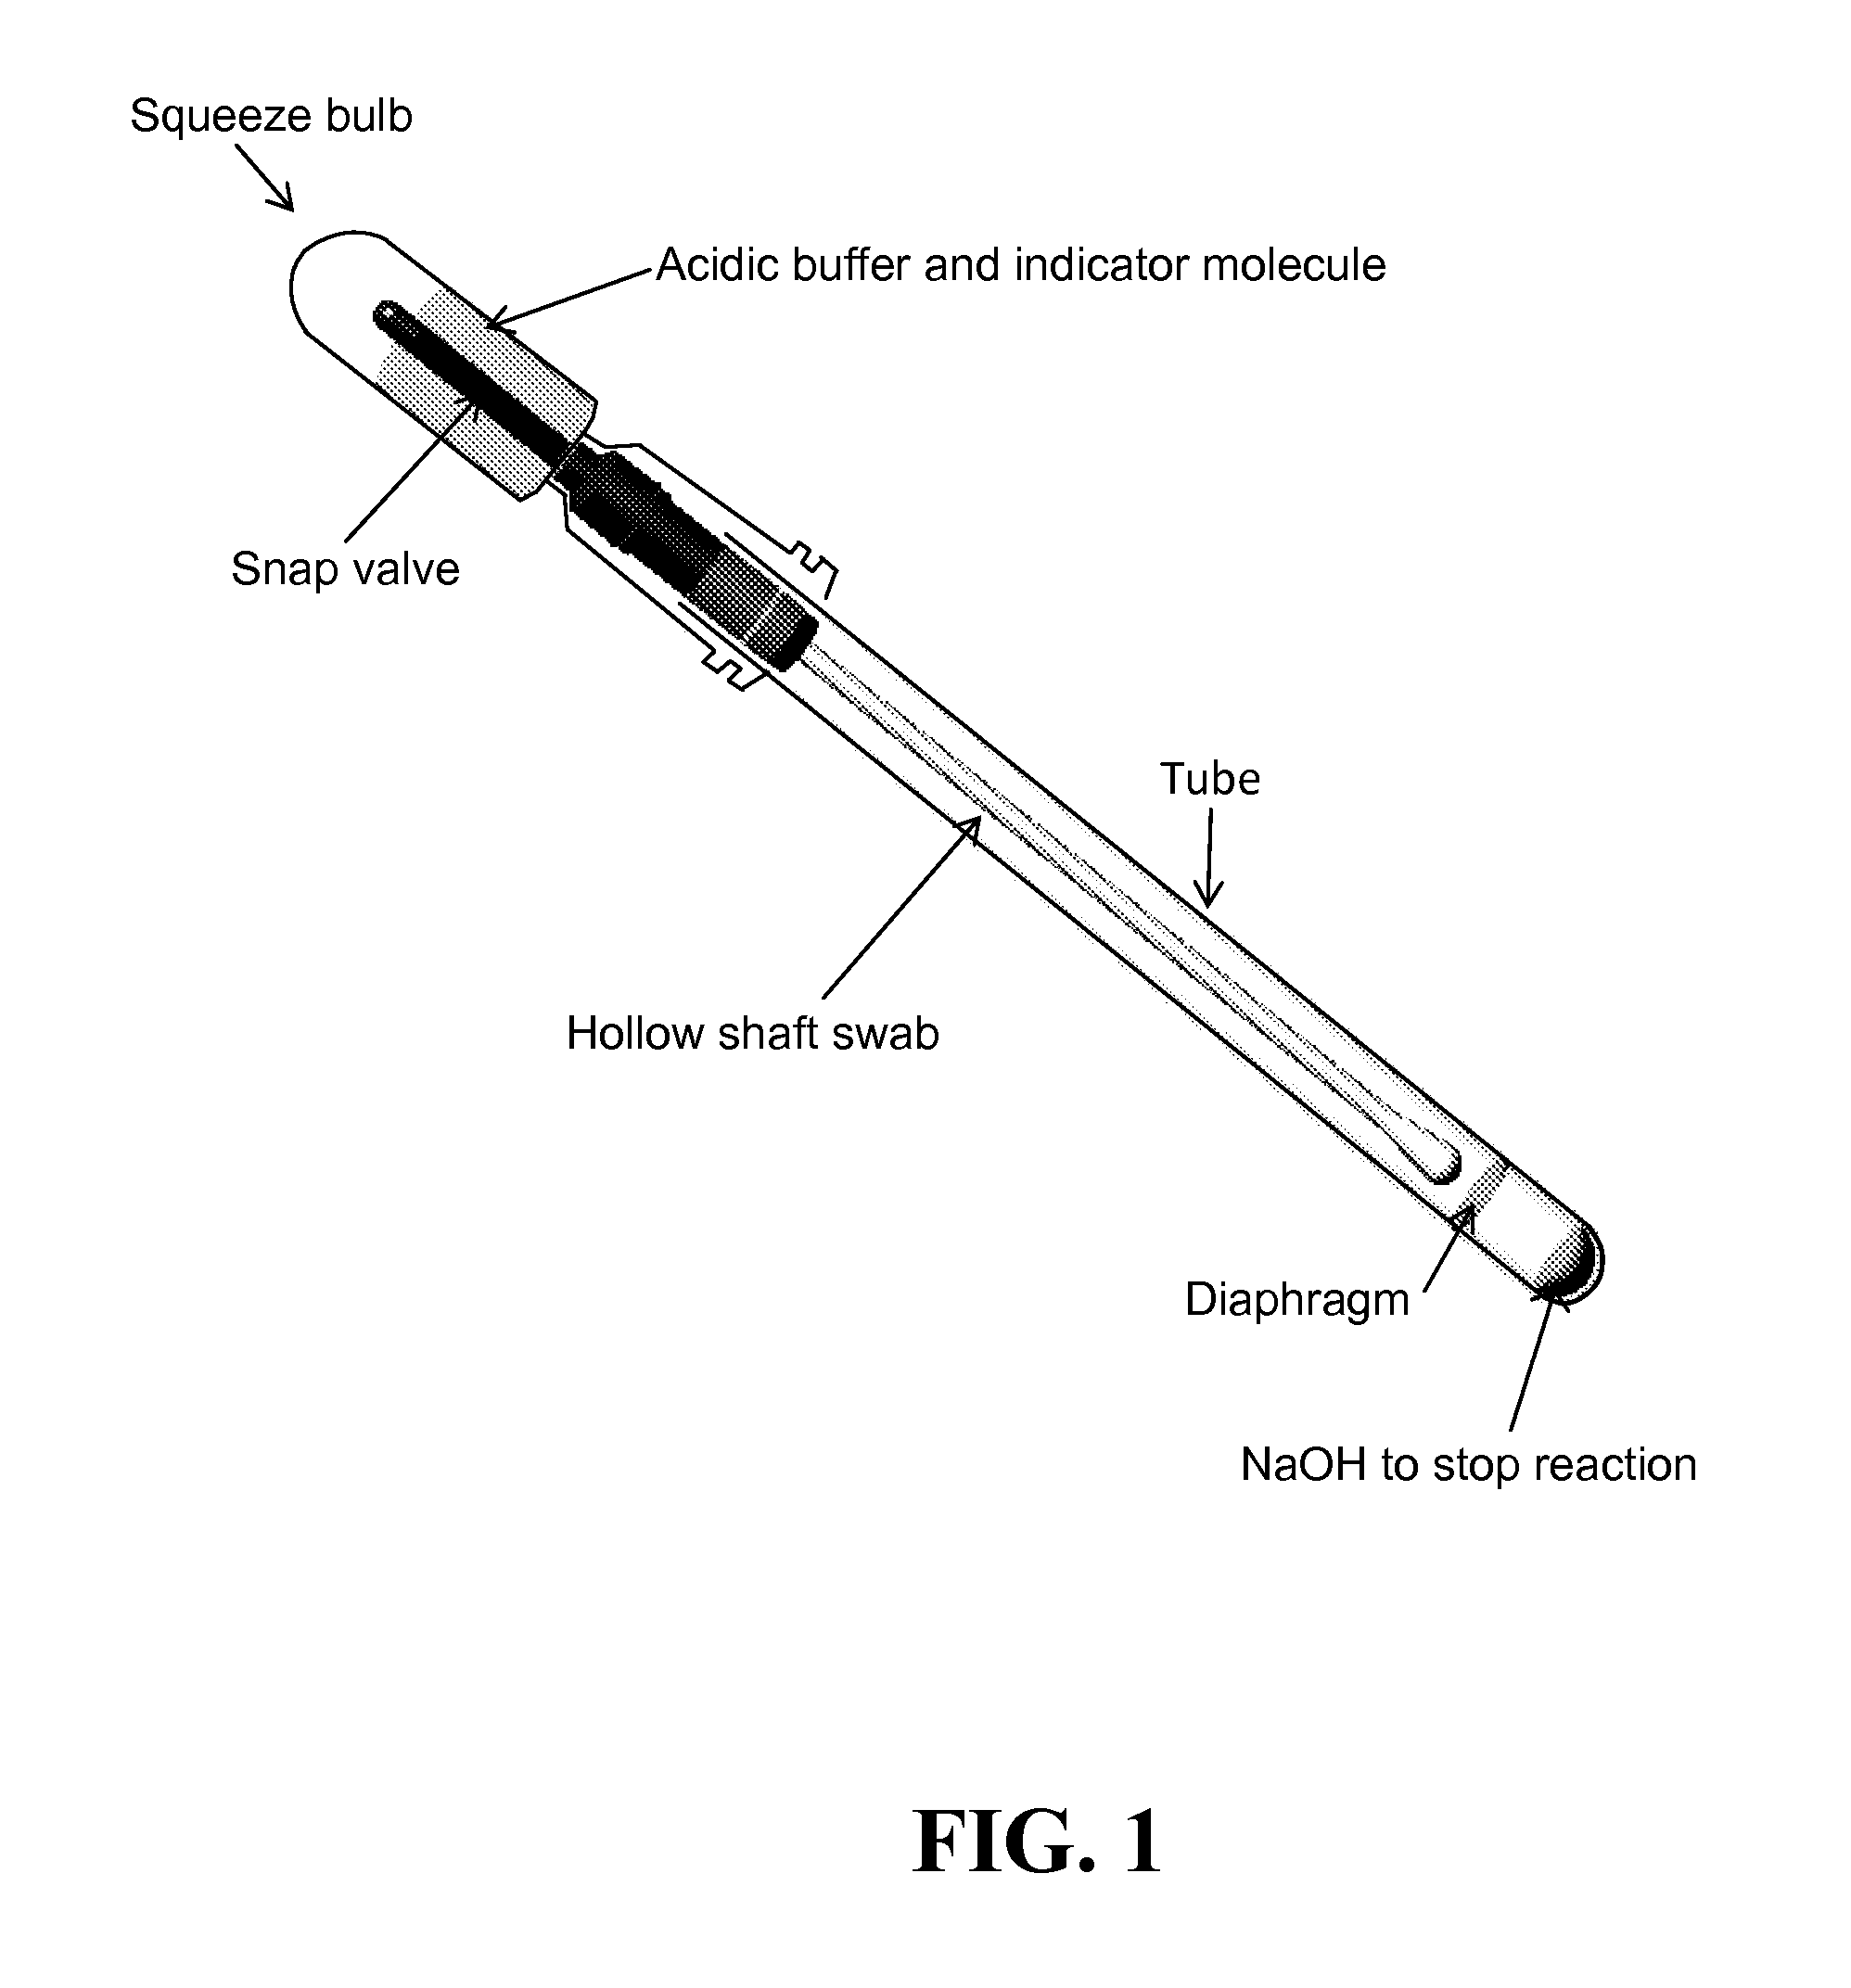 Materials and methods for measuring nitric oxide levels in biological fluids